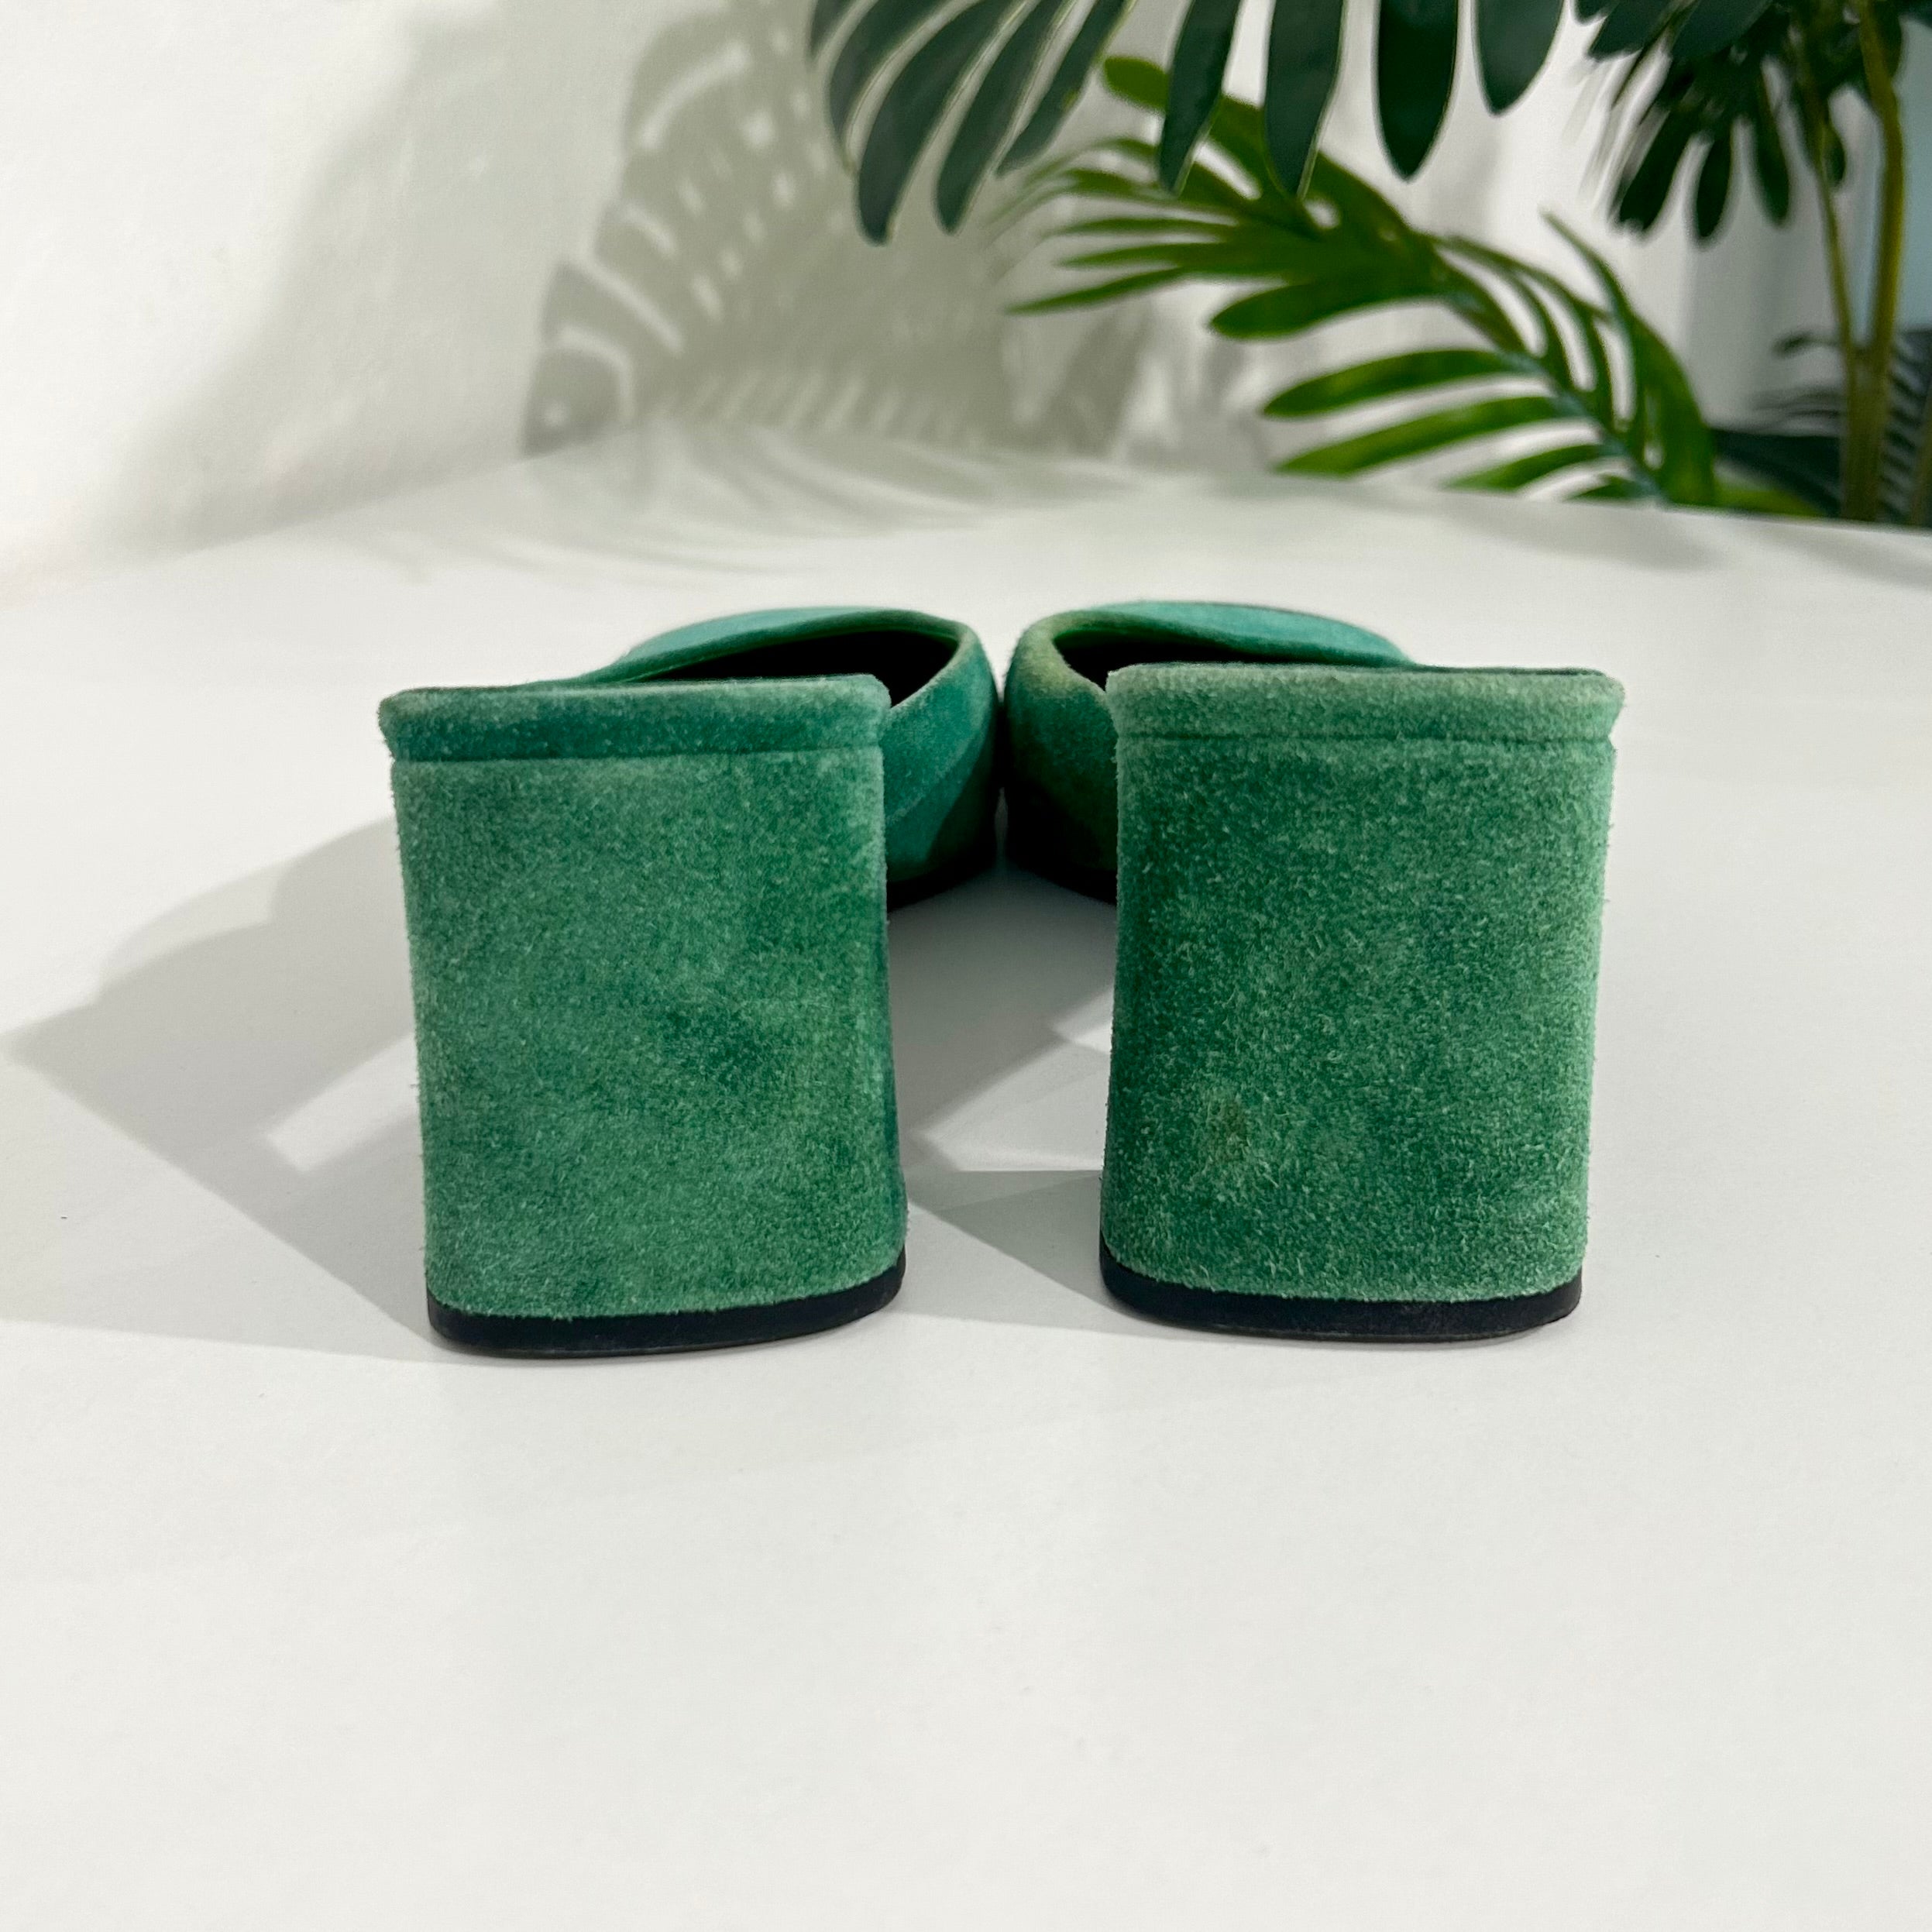 Prada FW99 Green Suede Mules with Silver Toe